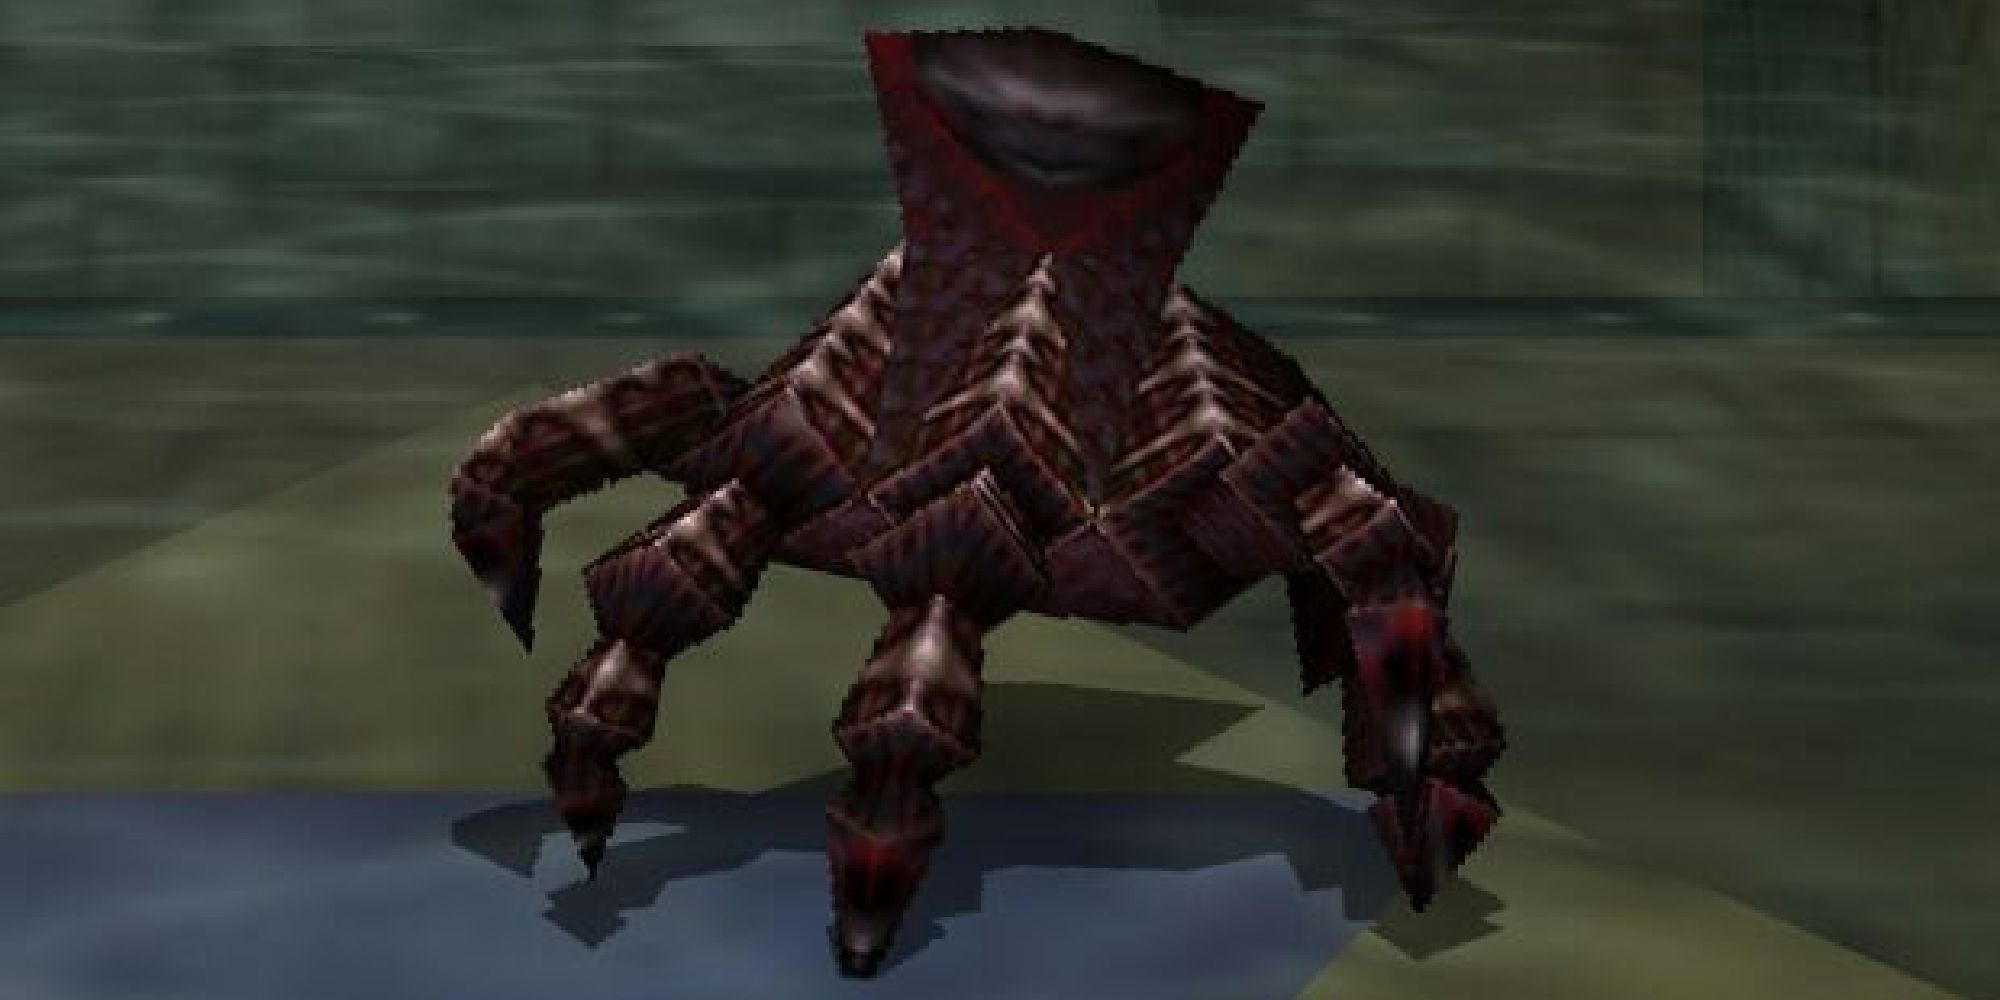 A Wallmaster crawling on the ground in Ocarina of Time